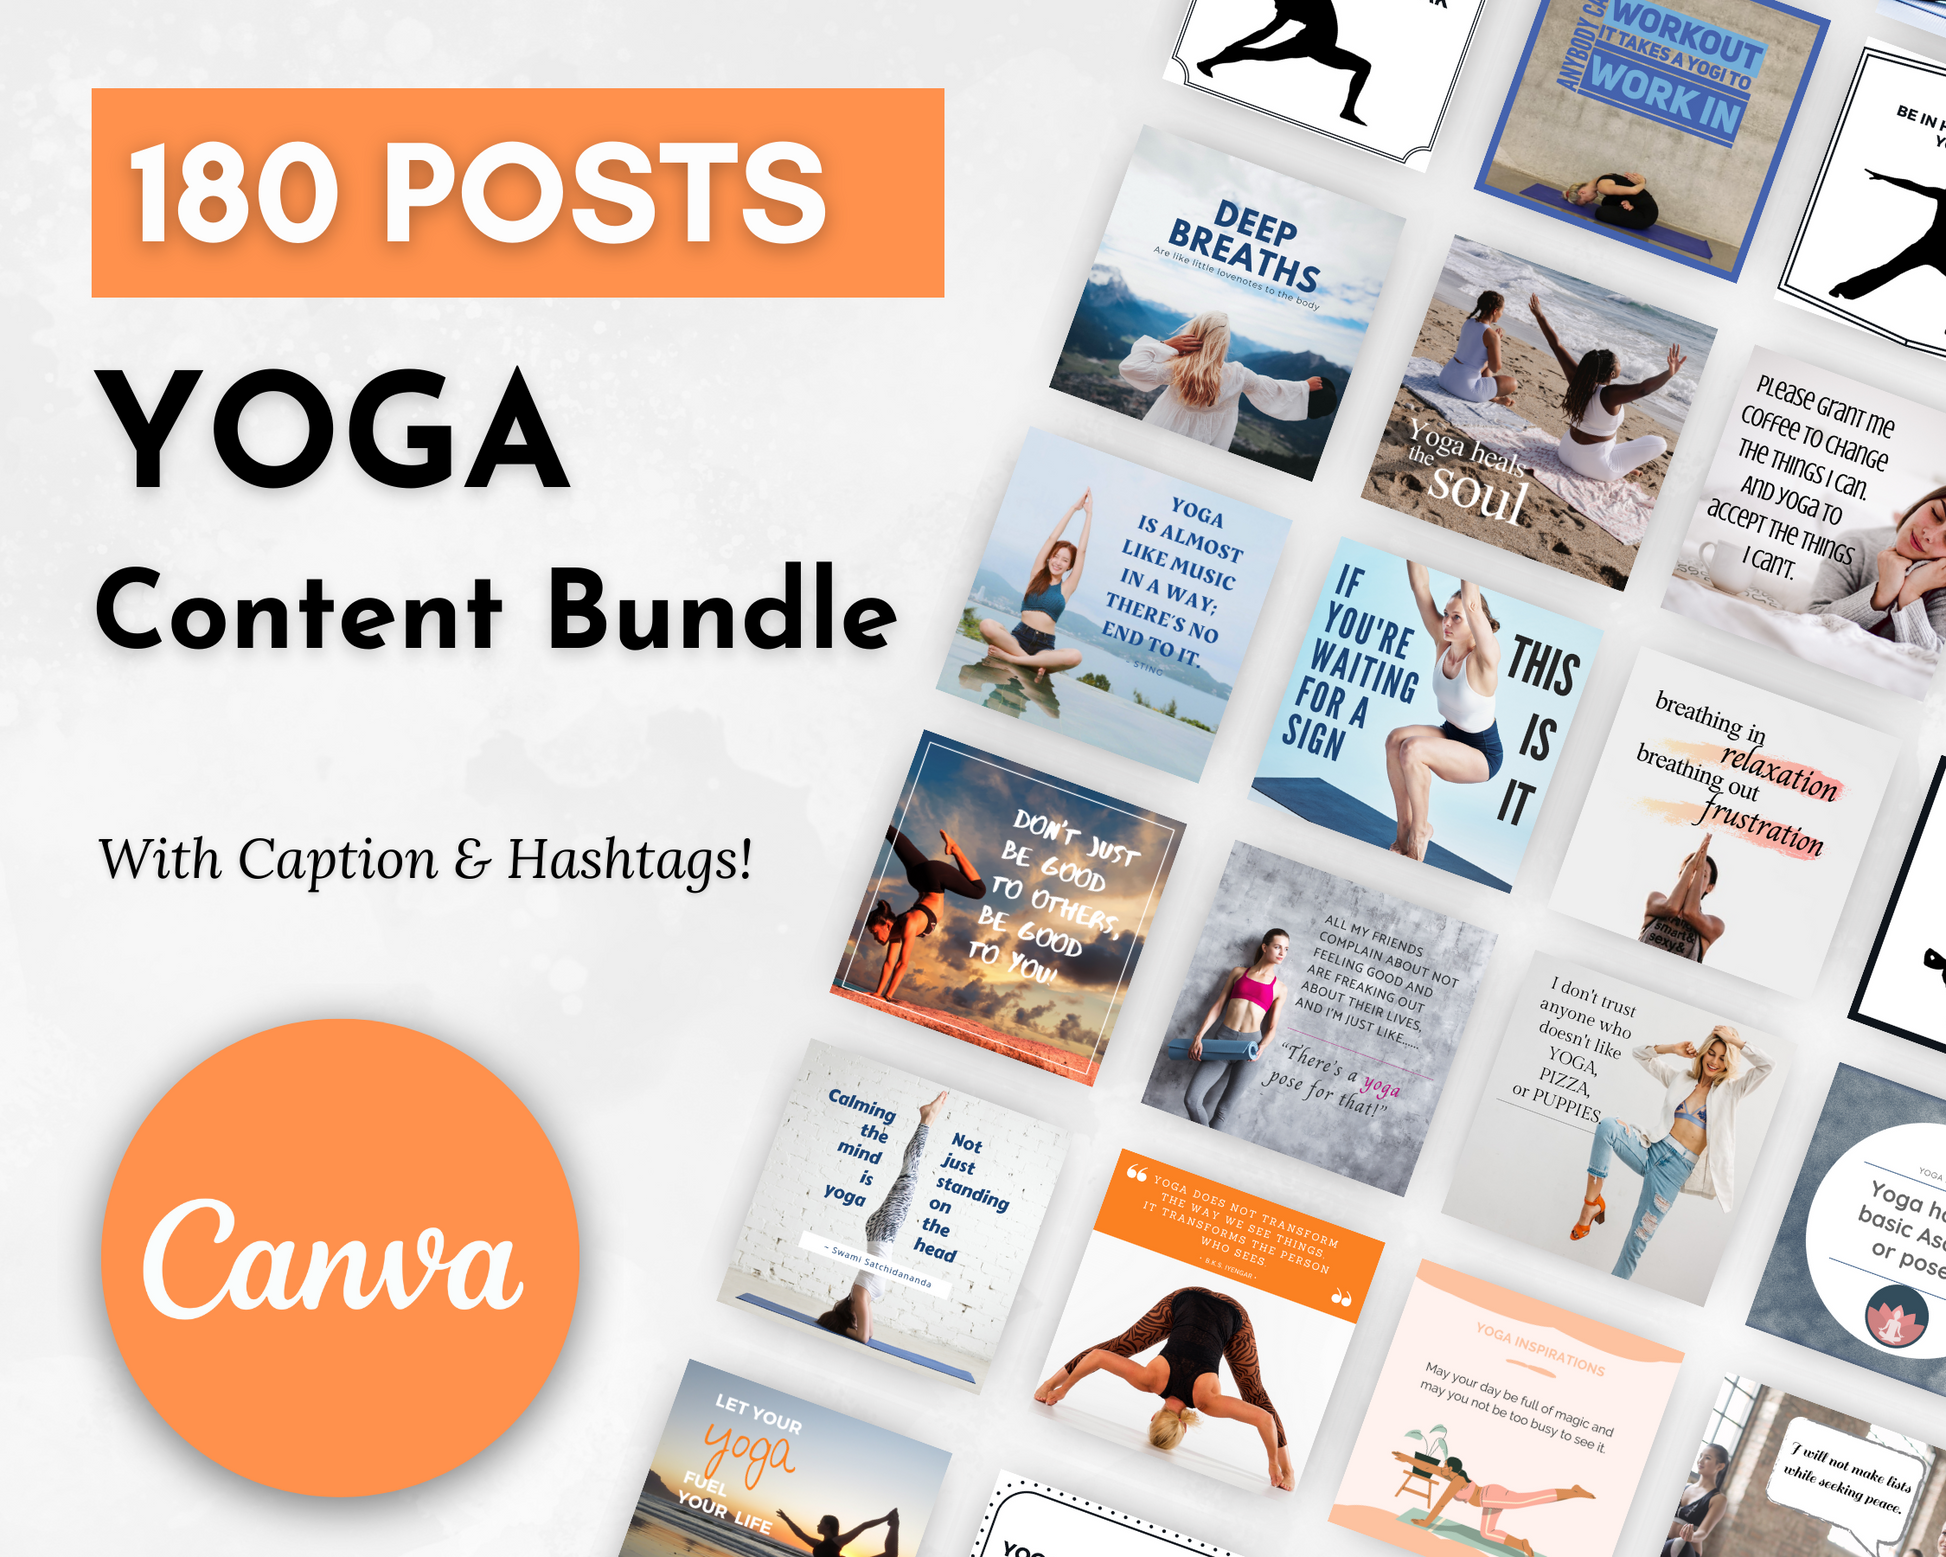 Enhance your yoga business presence with the Socially Inclined Yoga Social Media Post Bundle, composed of carefully curated content and Canva templates for sharing across social media platforms or promoting your yoga studio.